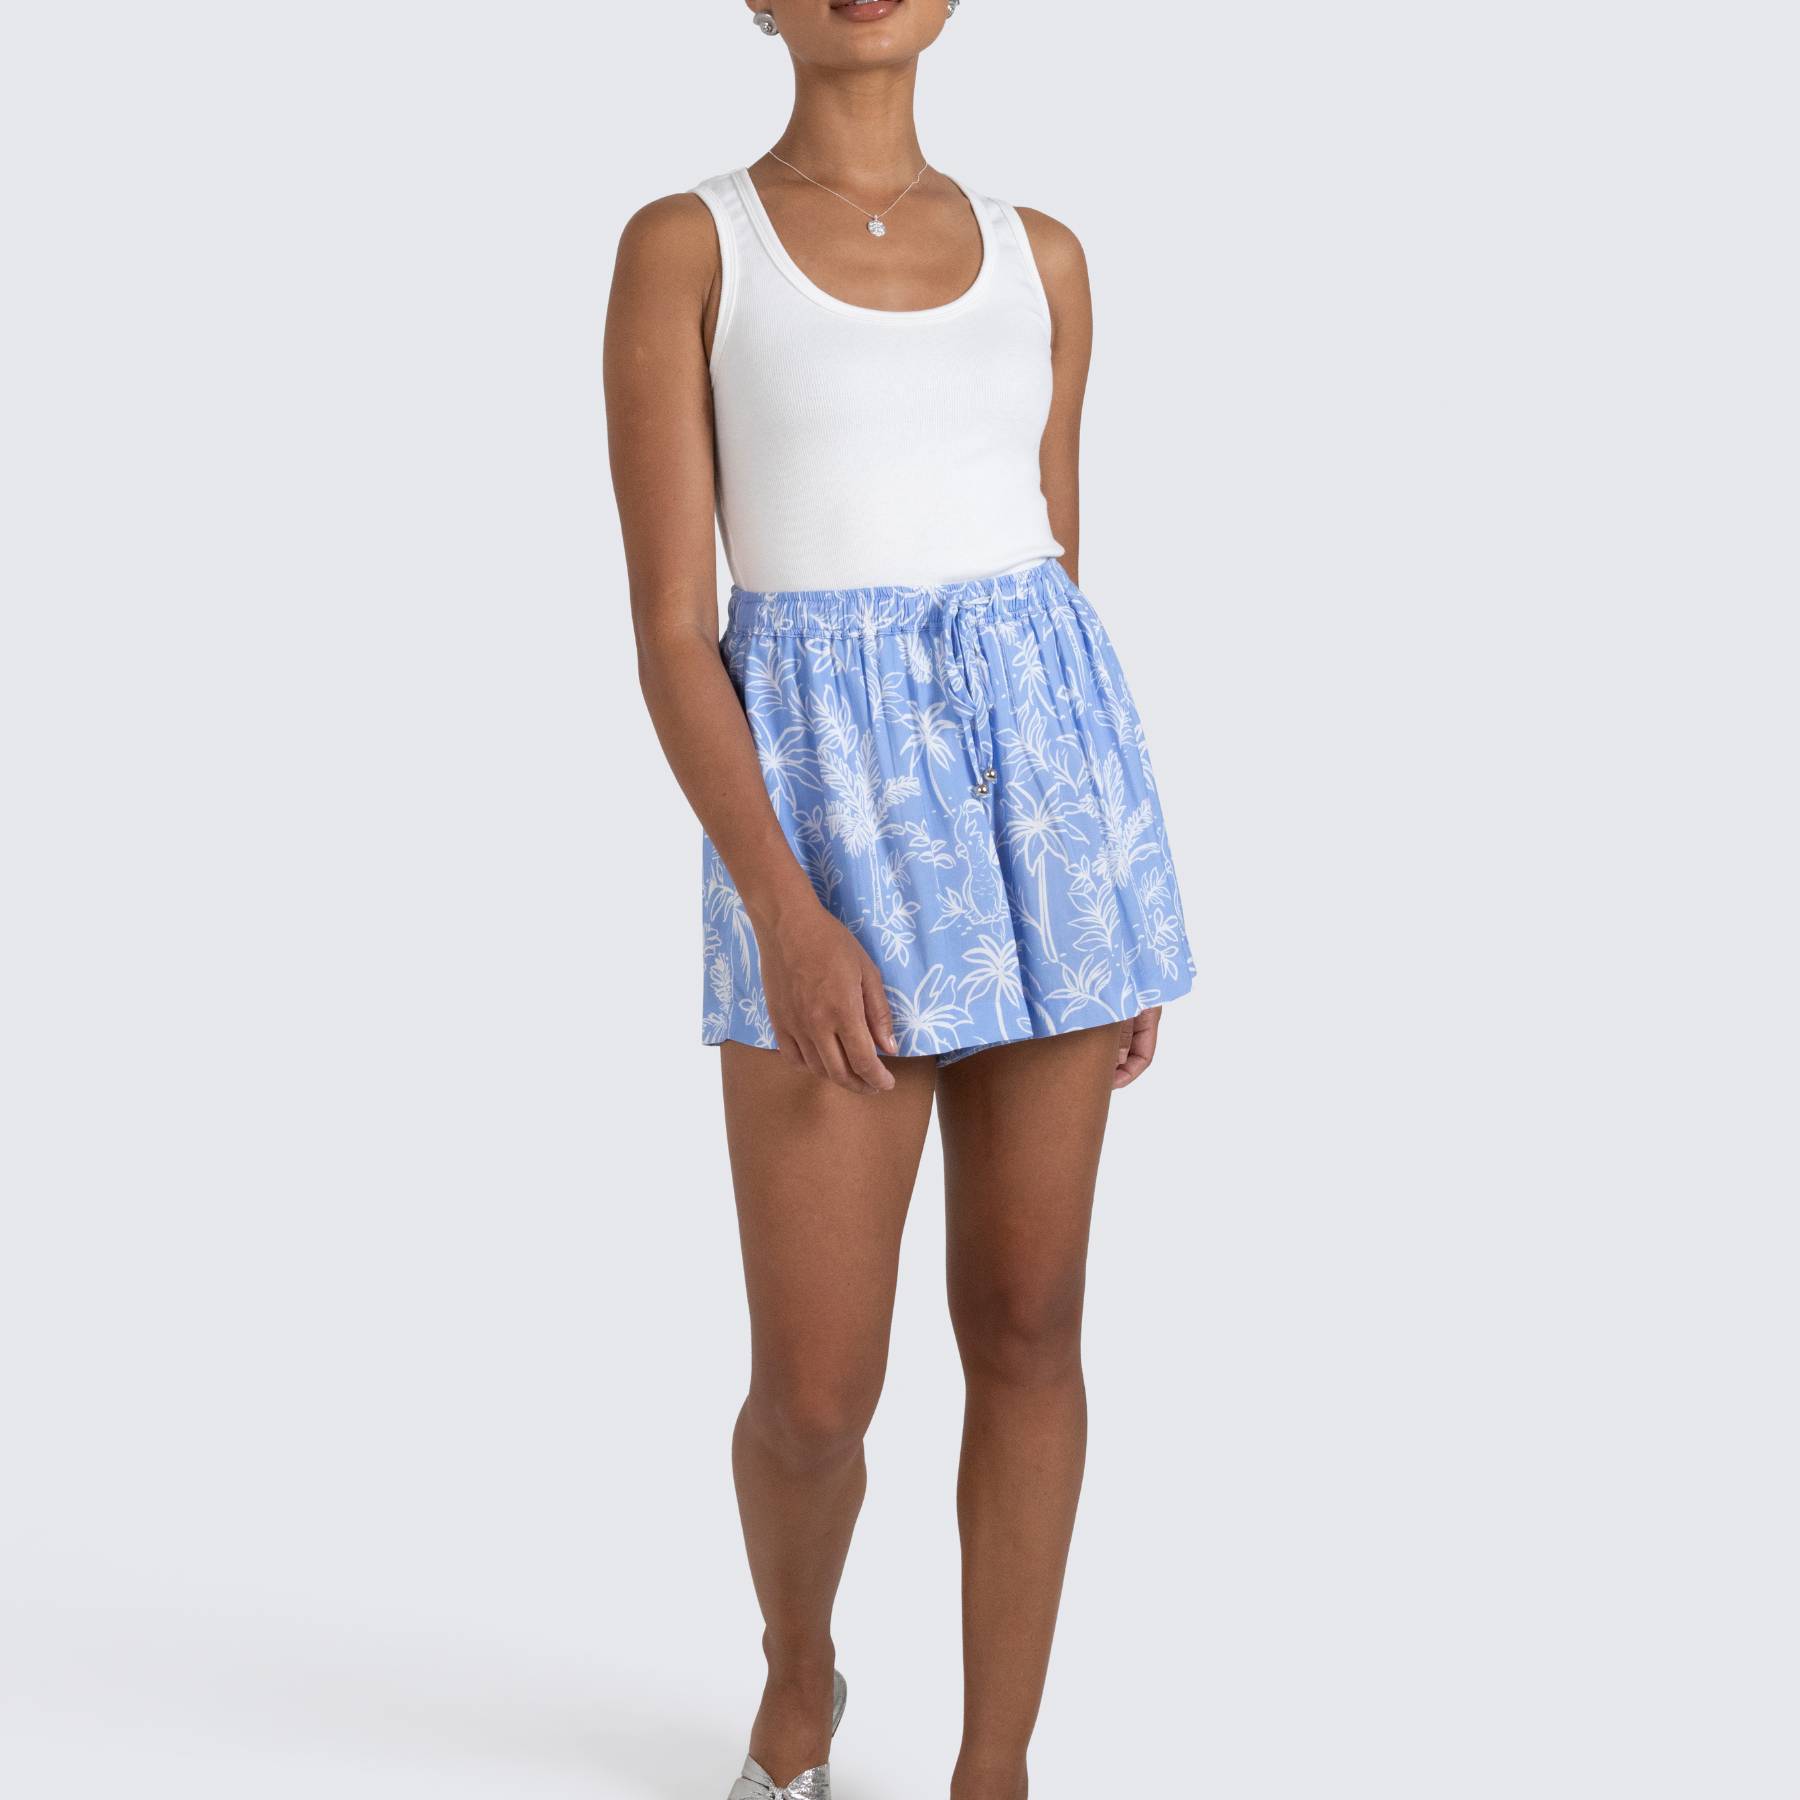 Lizzie printed woven shorts in the Sentosa Print